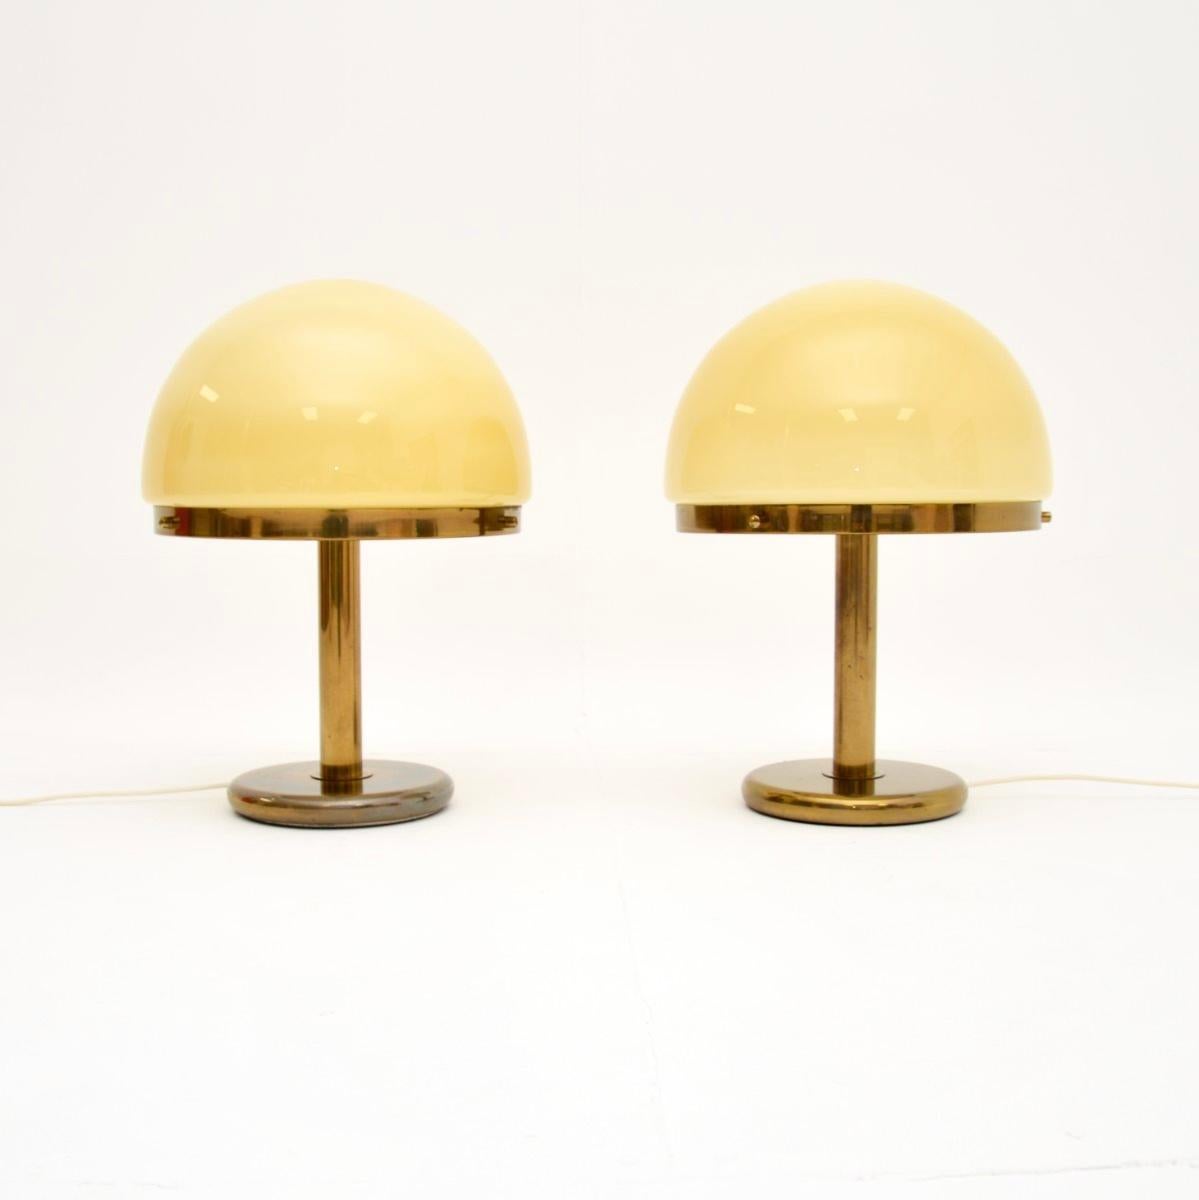 A fantastic pair of large vintage Italian brass and glass table lamps. They were made in Italy, they date from the 1970’s.

The quality is exceptional, they are a great size and are very impressive. The glass shades are a beautiful colour, and look